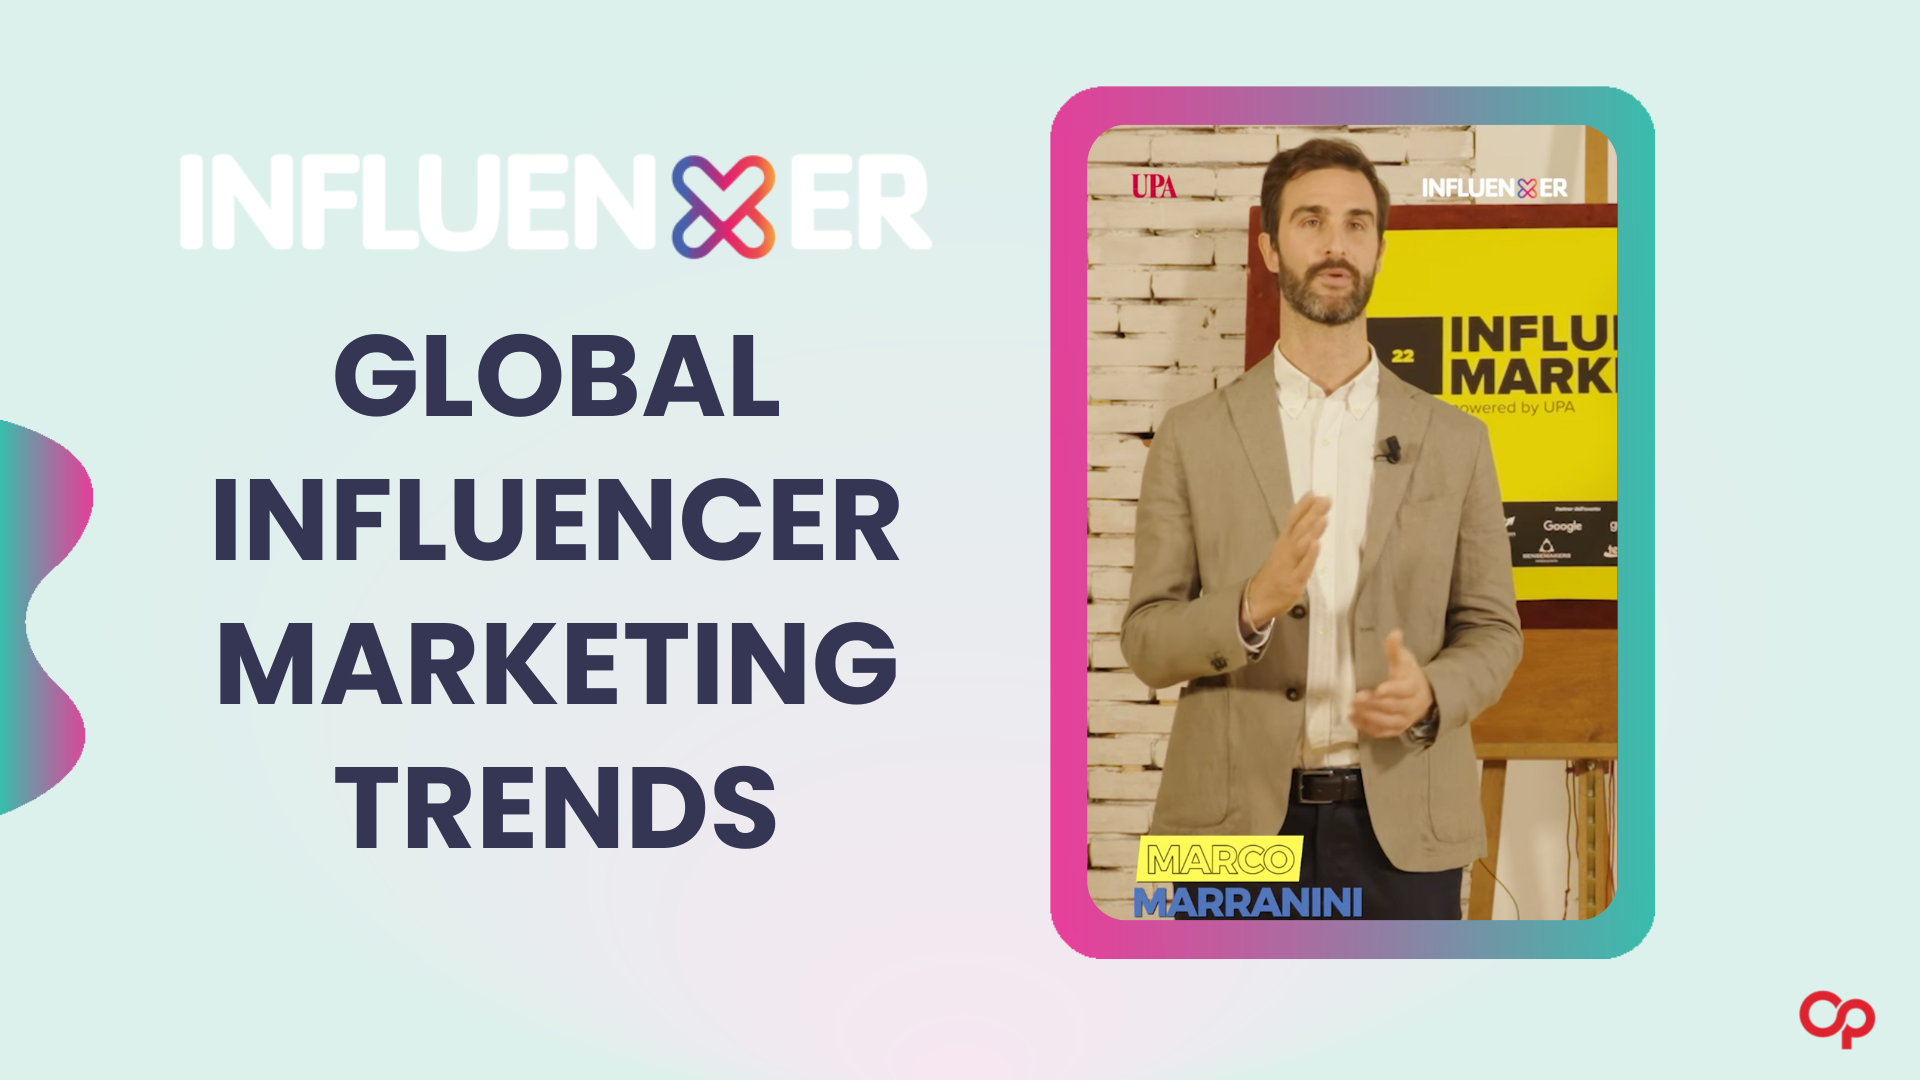 Global Influencer Marketing Trends from Marco Marranini